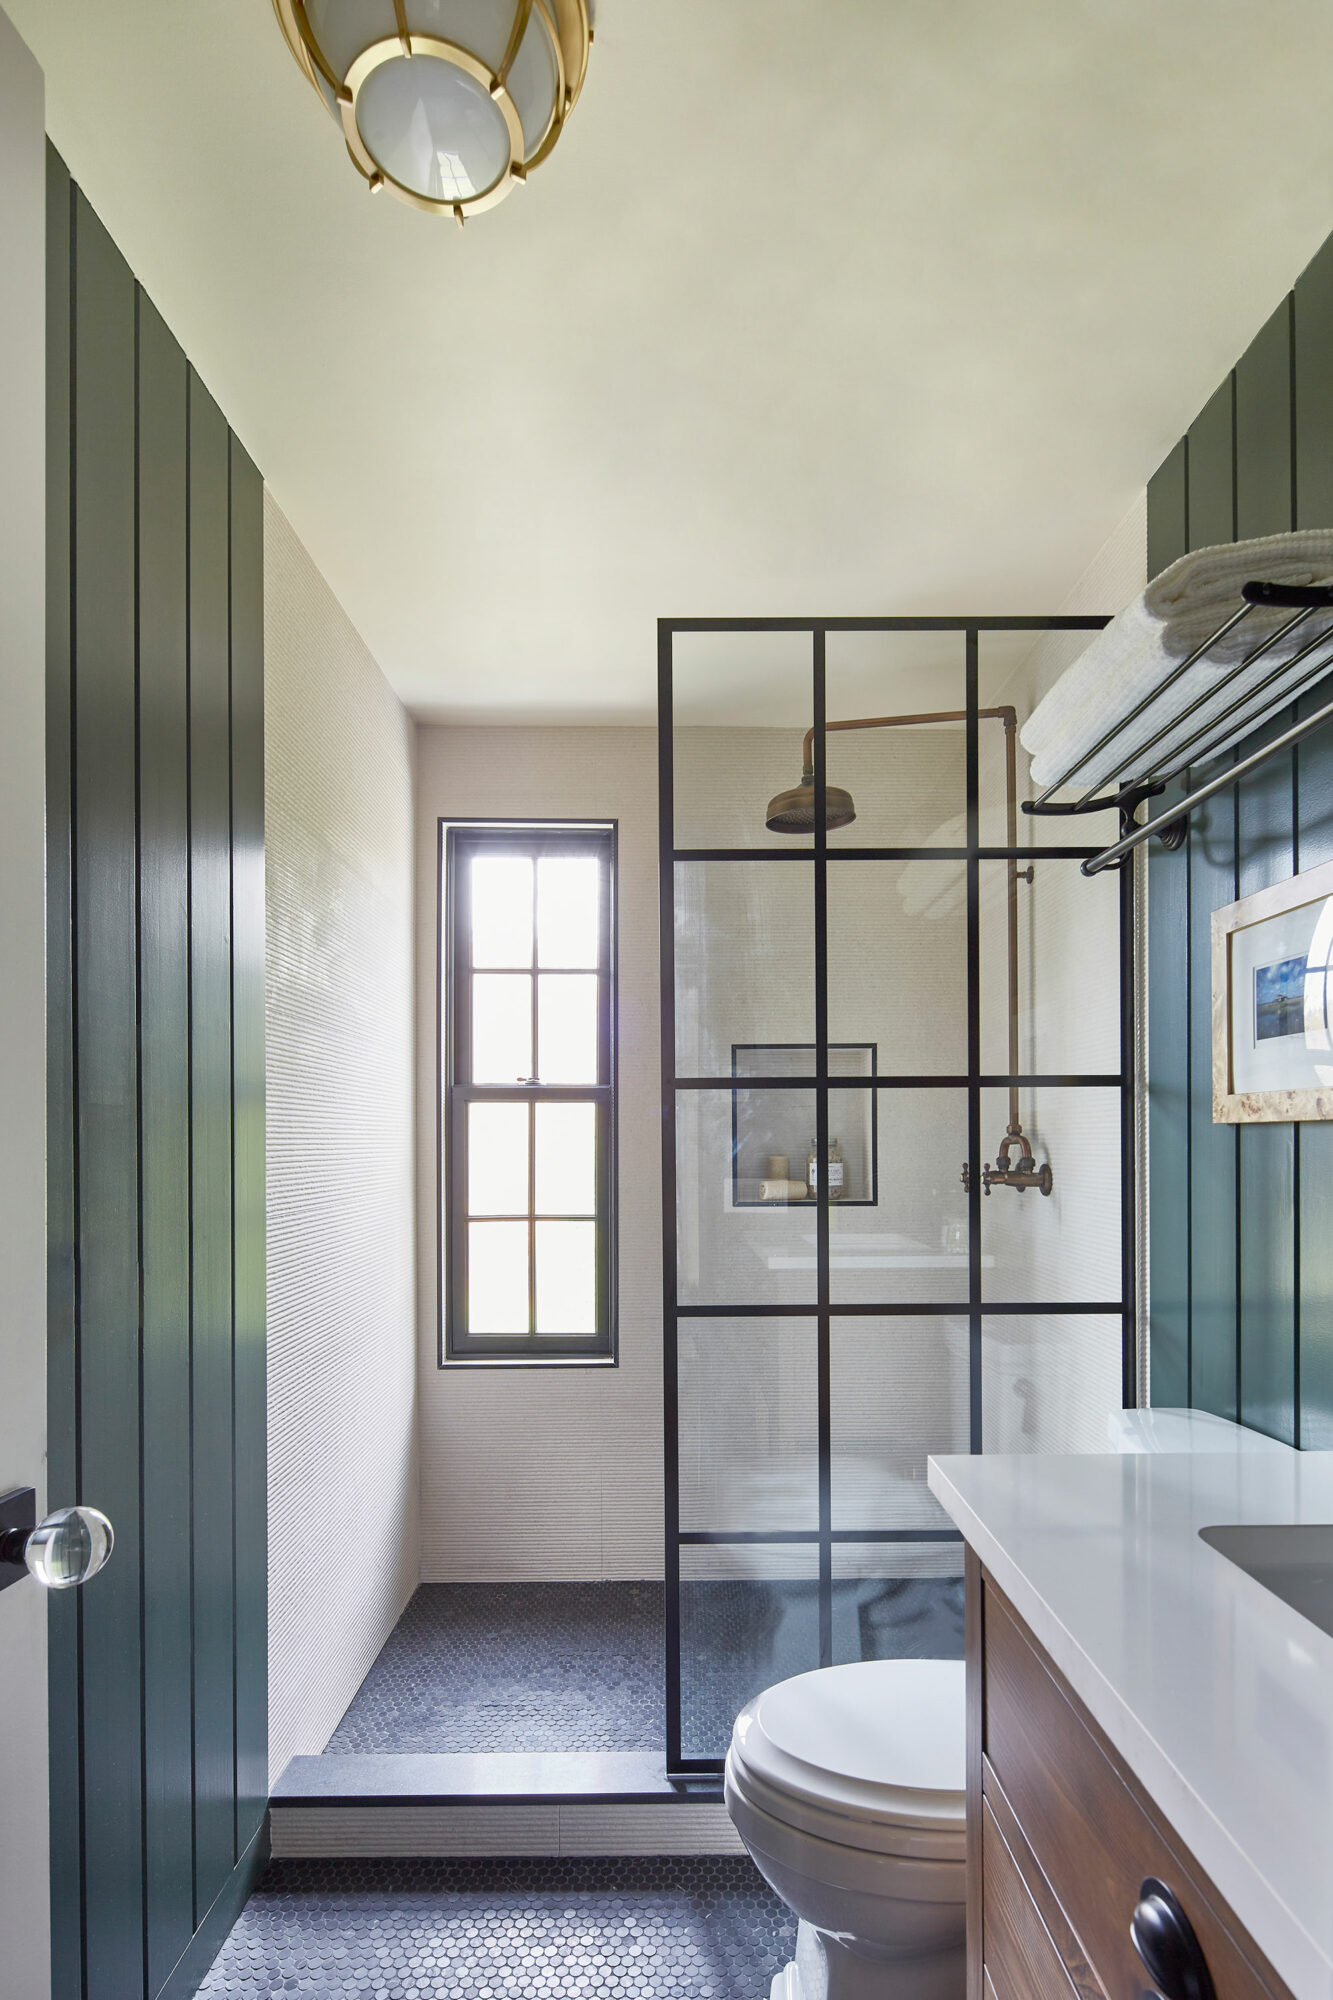 dark green was the best paint color for the paneling in this small bathroom with a black steel shower door